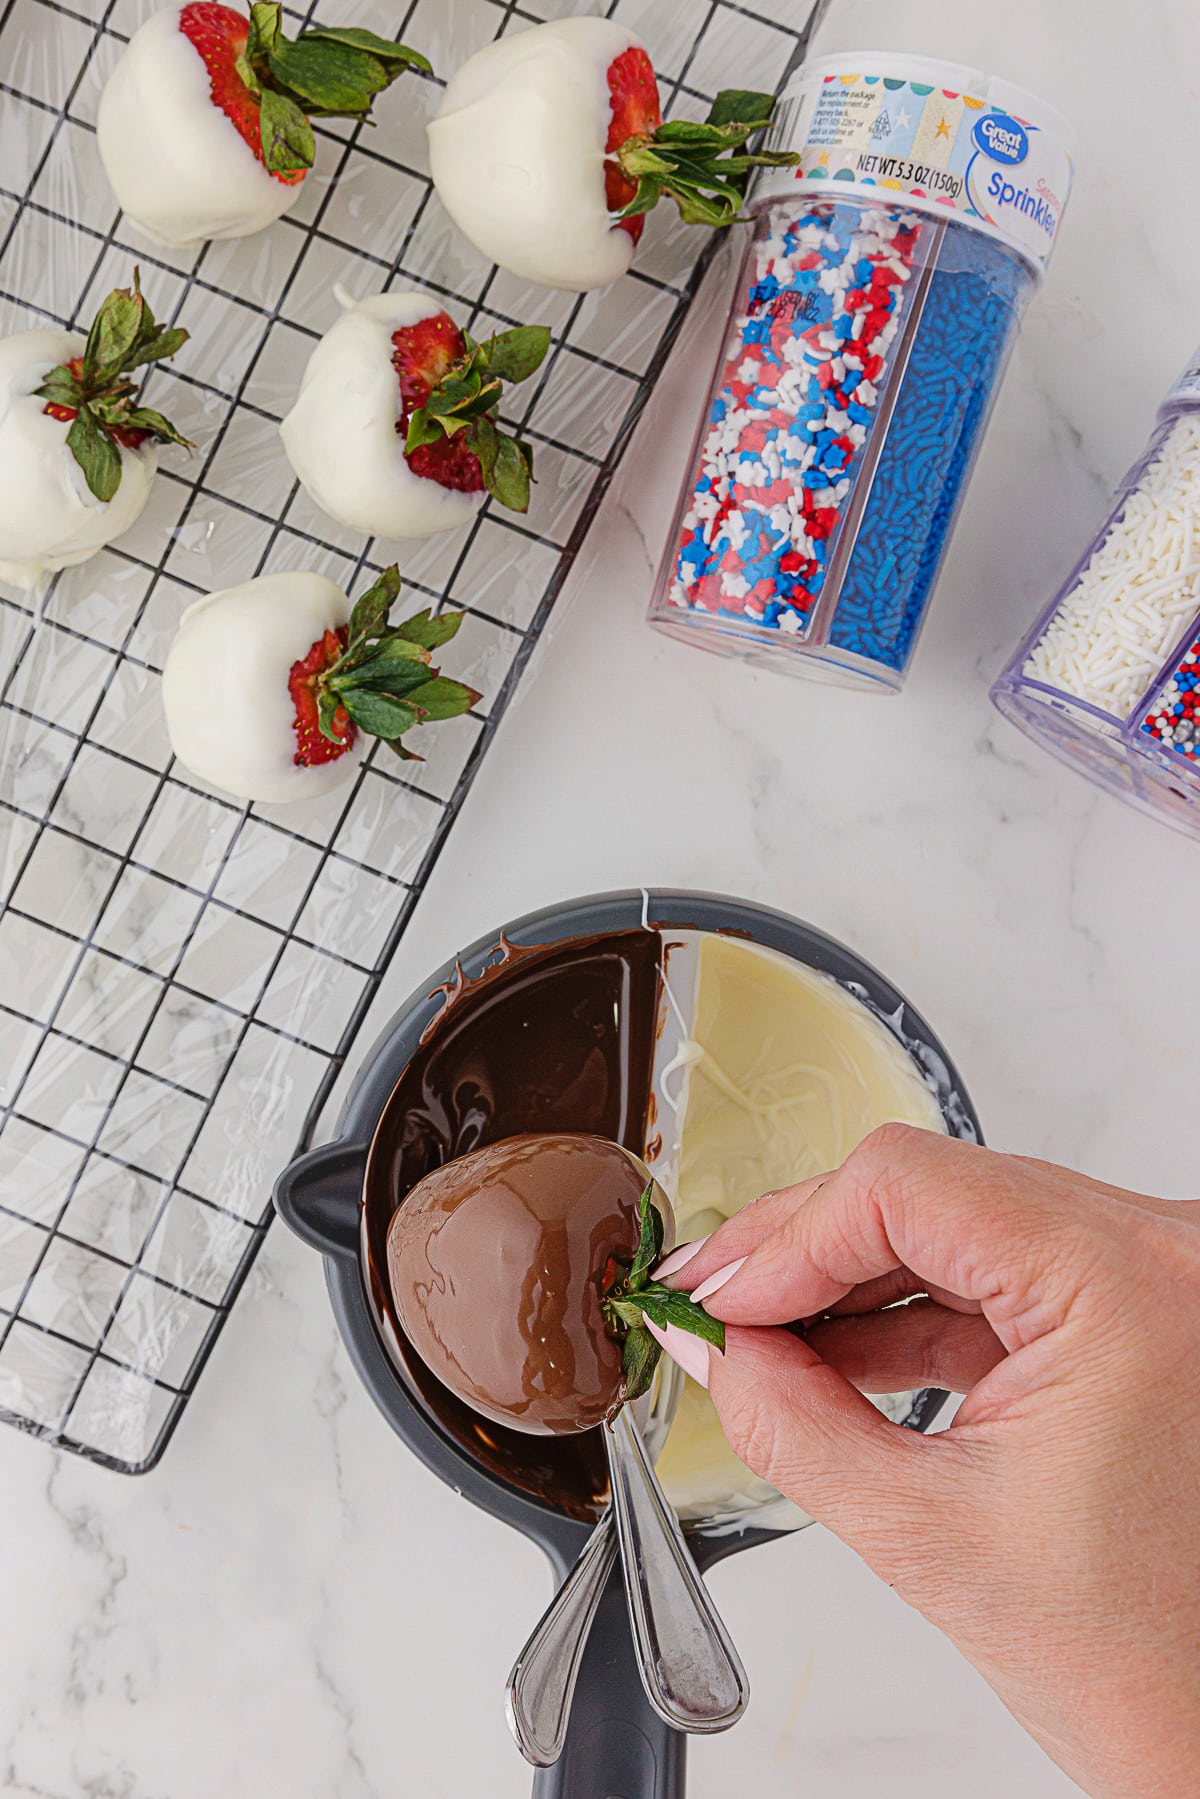 Dipping strawberries in either dark or white chocolate, and bottles of edible red, white and blue sprinkles and stars